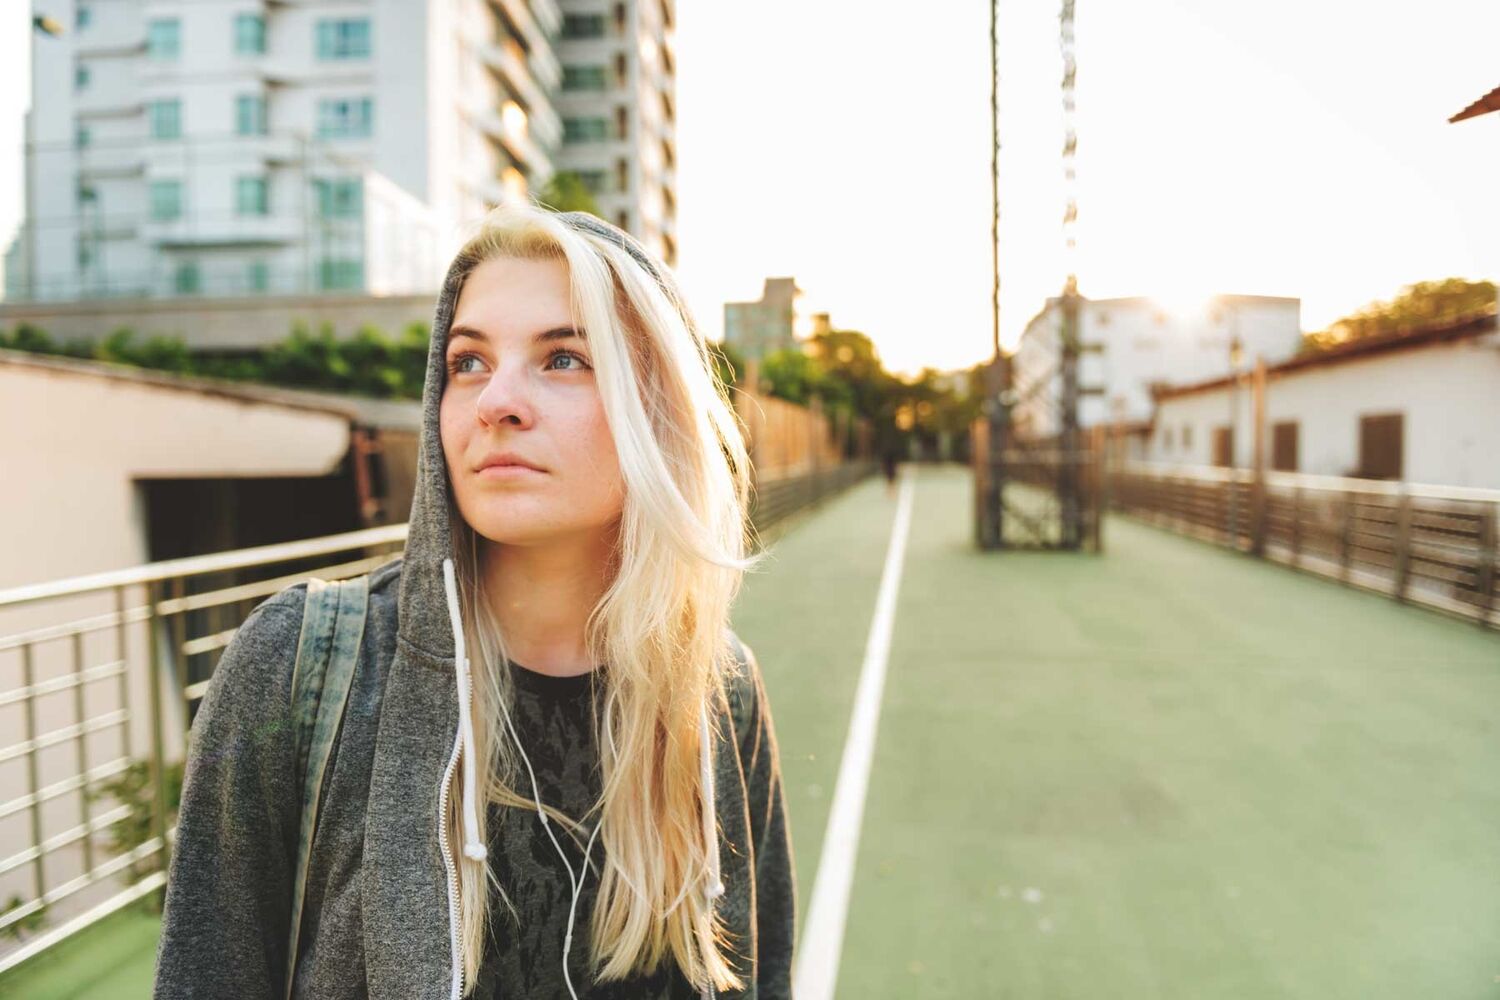 Young Woman With Blonde Hair In Grey Hoodie Looking Into Distance